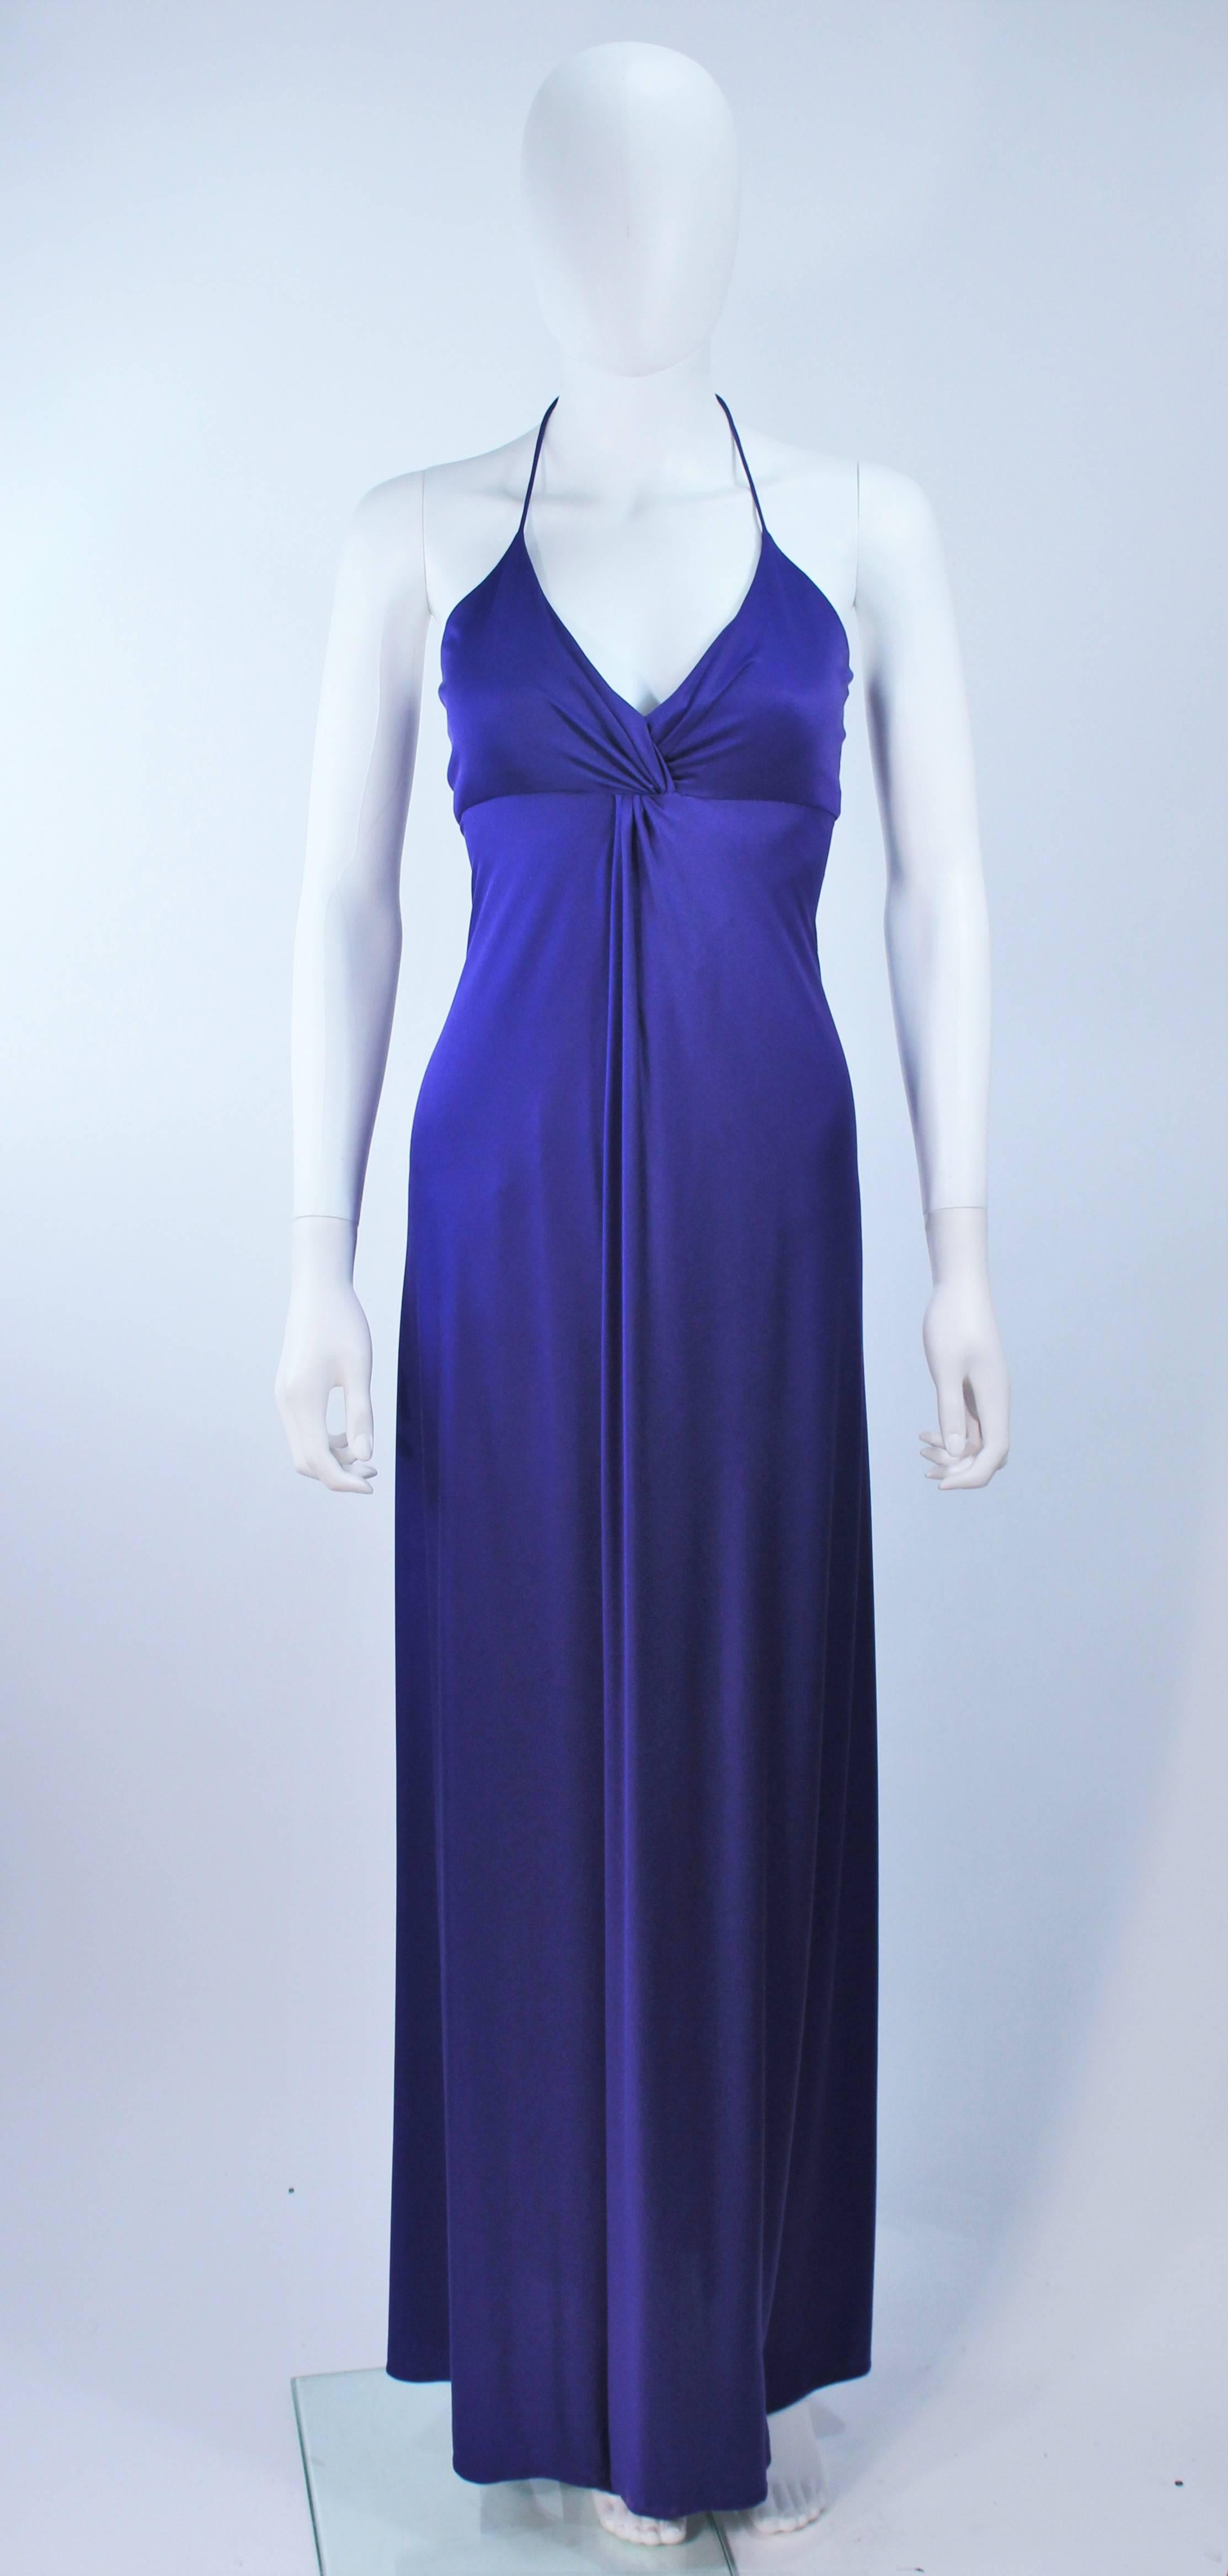 This Elizabeth Mason Couture  gown is composed of a purple silk jersey and features a draped design. There is a halter style neckline. This effortlessly chic gown can be styled in a variety of fashions. Made in Beverly Hills. 

 The gown may be